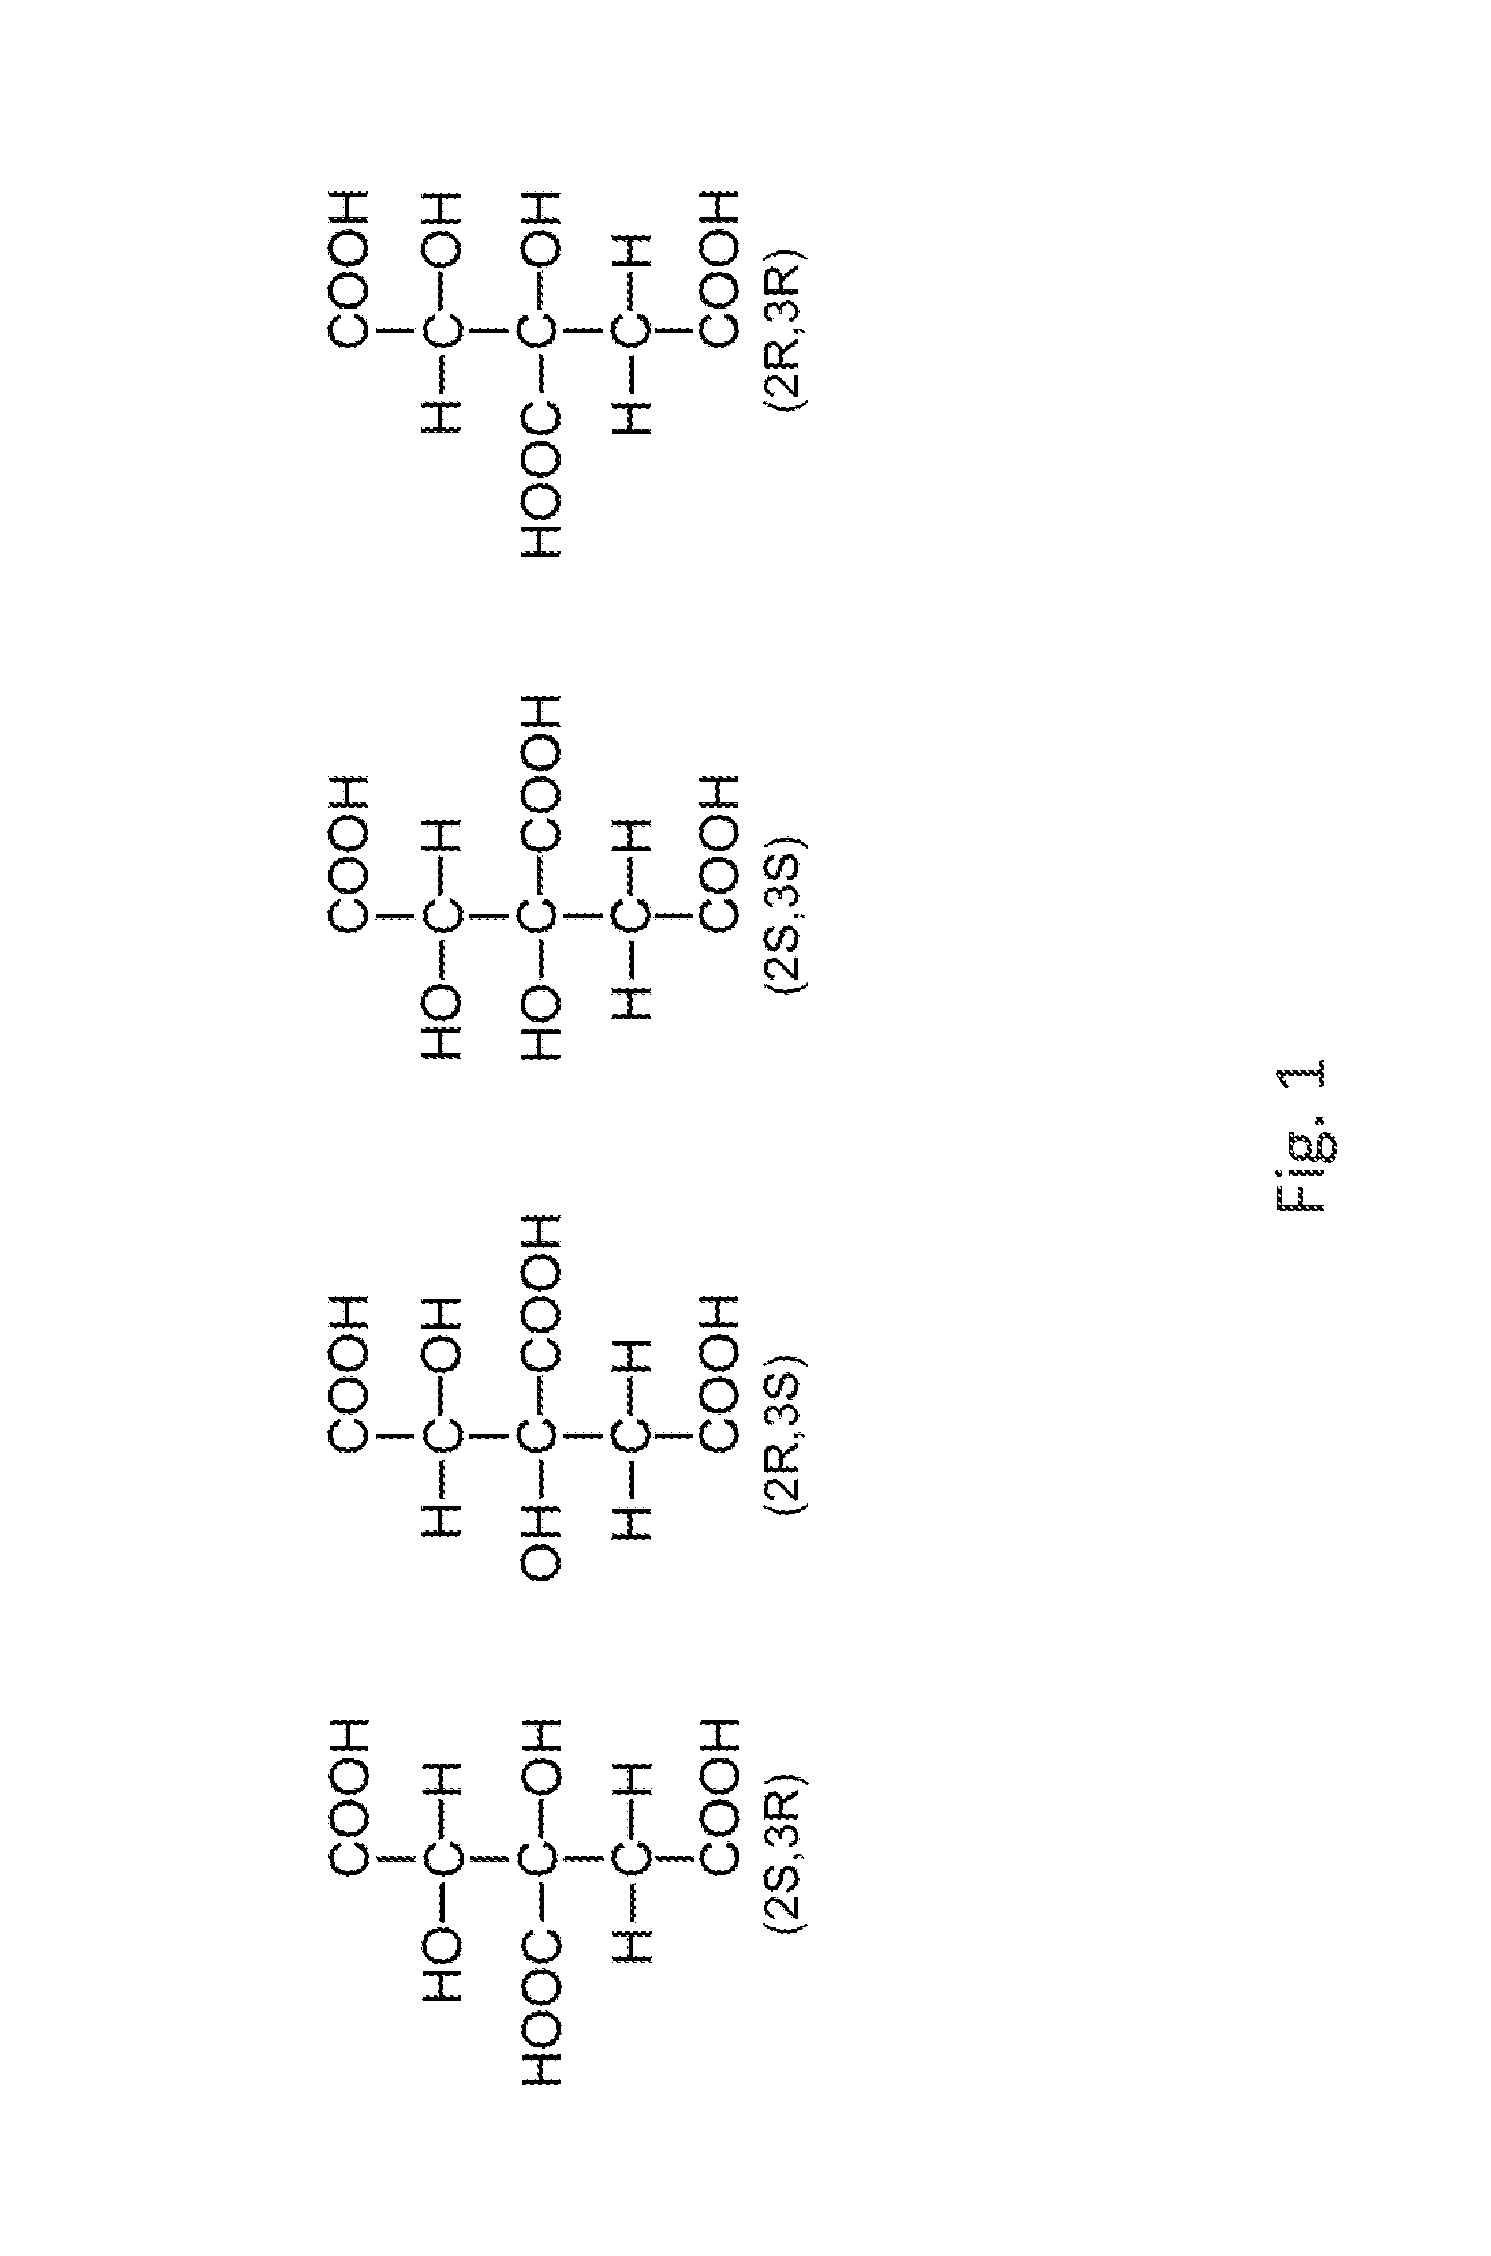 Organic acids as agents to dissolve calcium minerals in pathological calcification and uses thereof